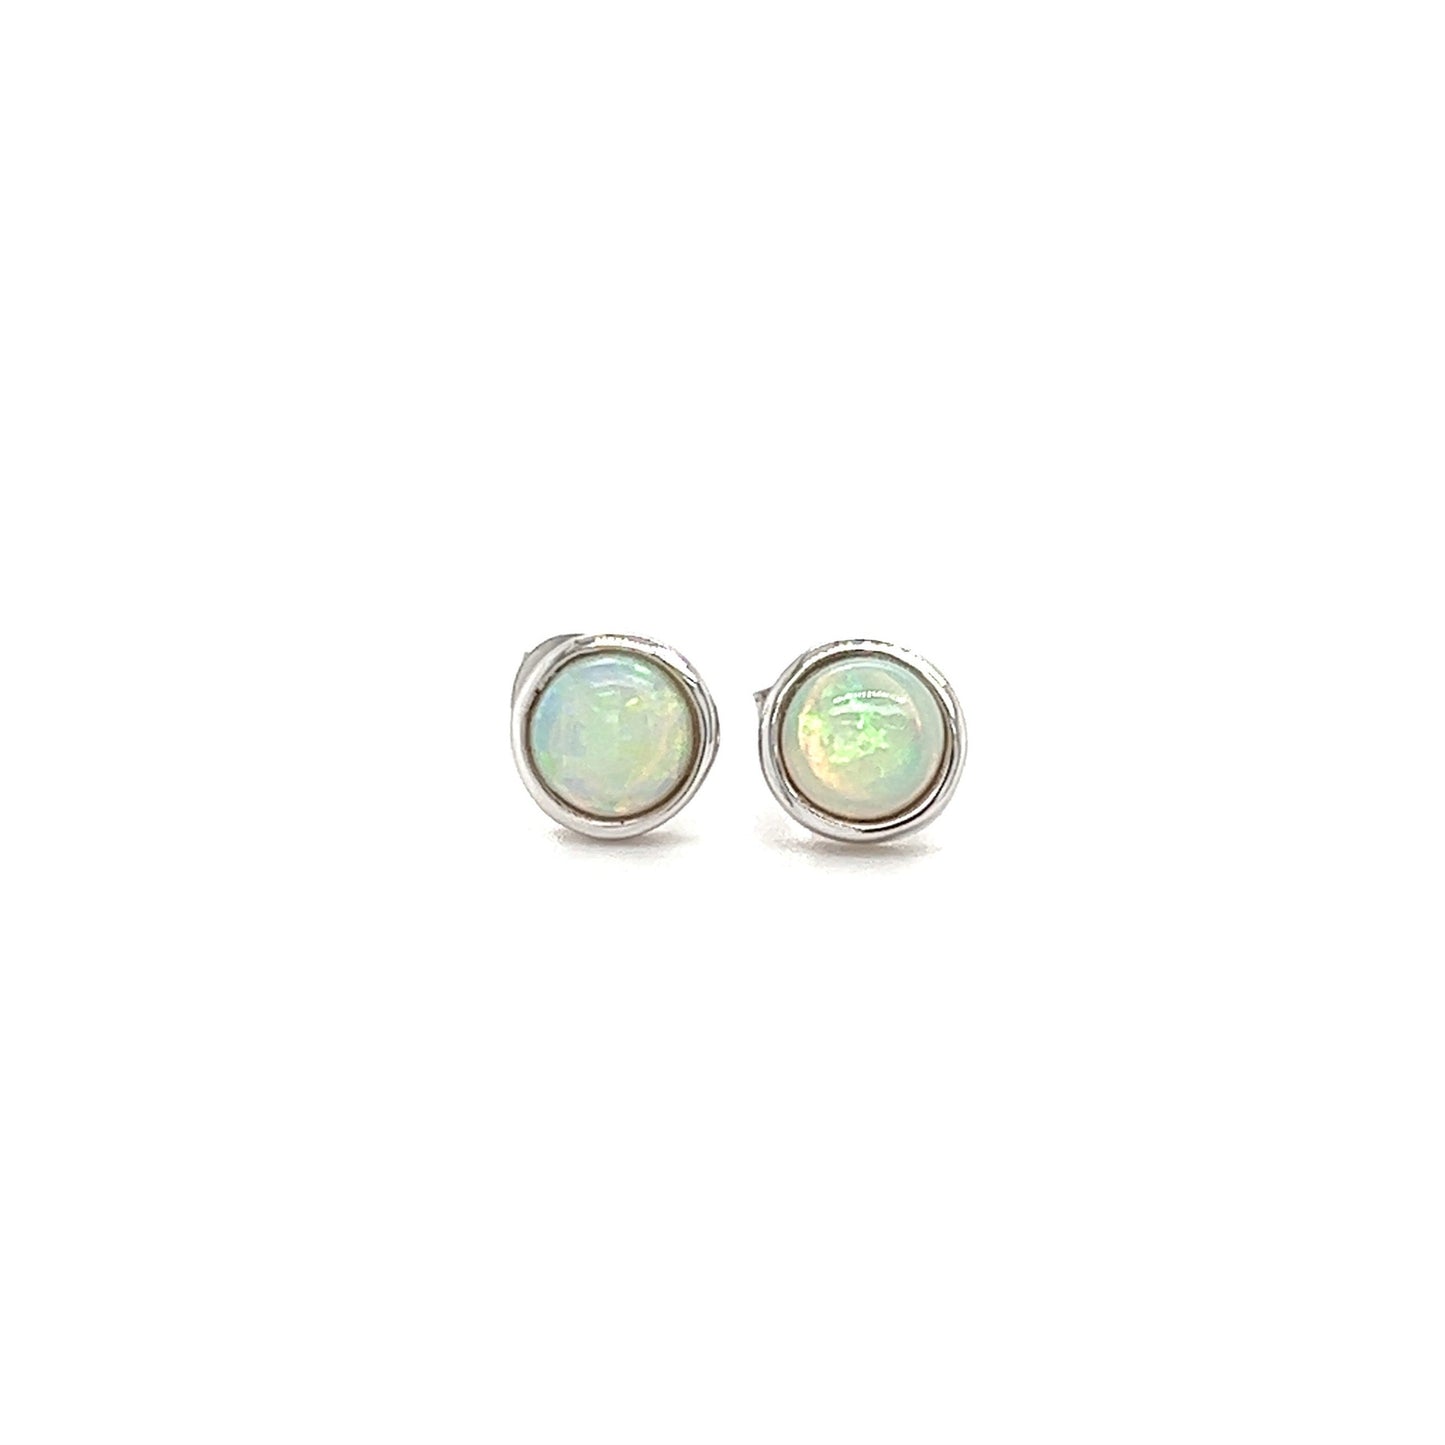 Opal Stud Earrings with 0.66ctw of Opals in 14K White Gold Front View